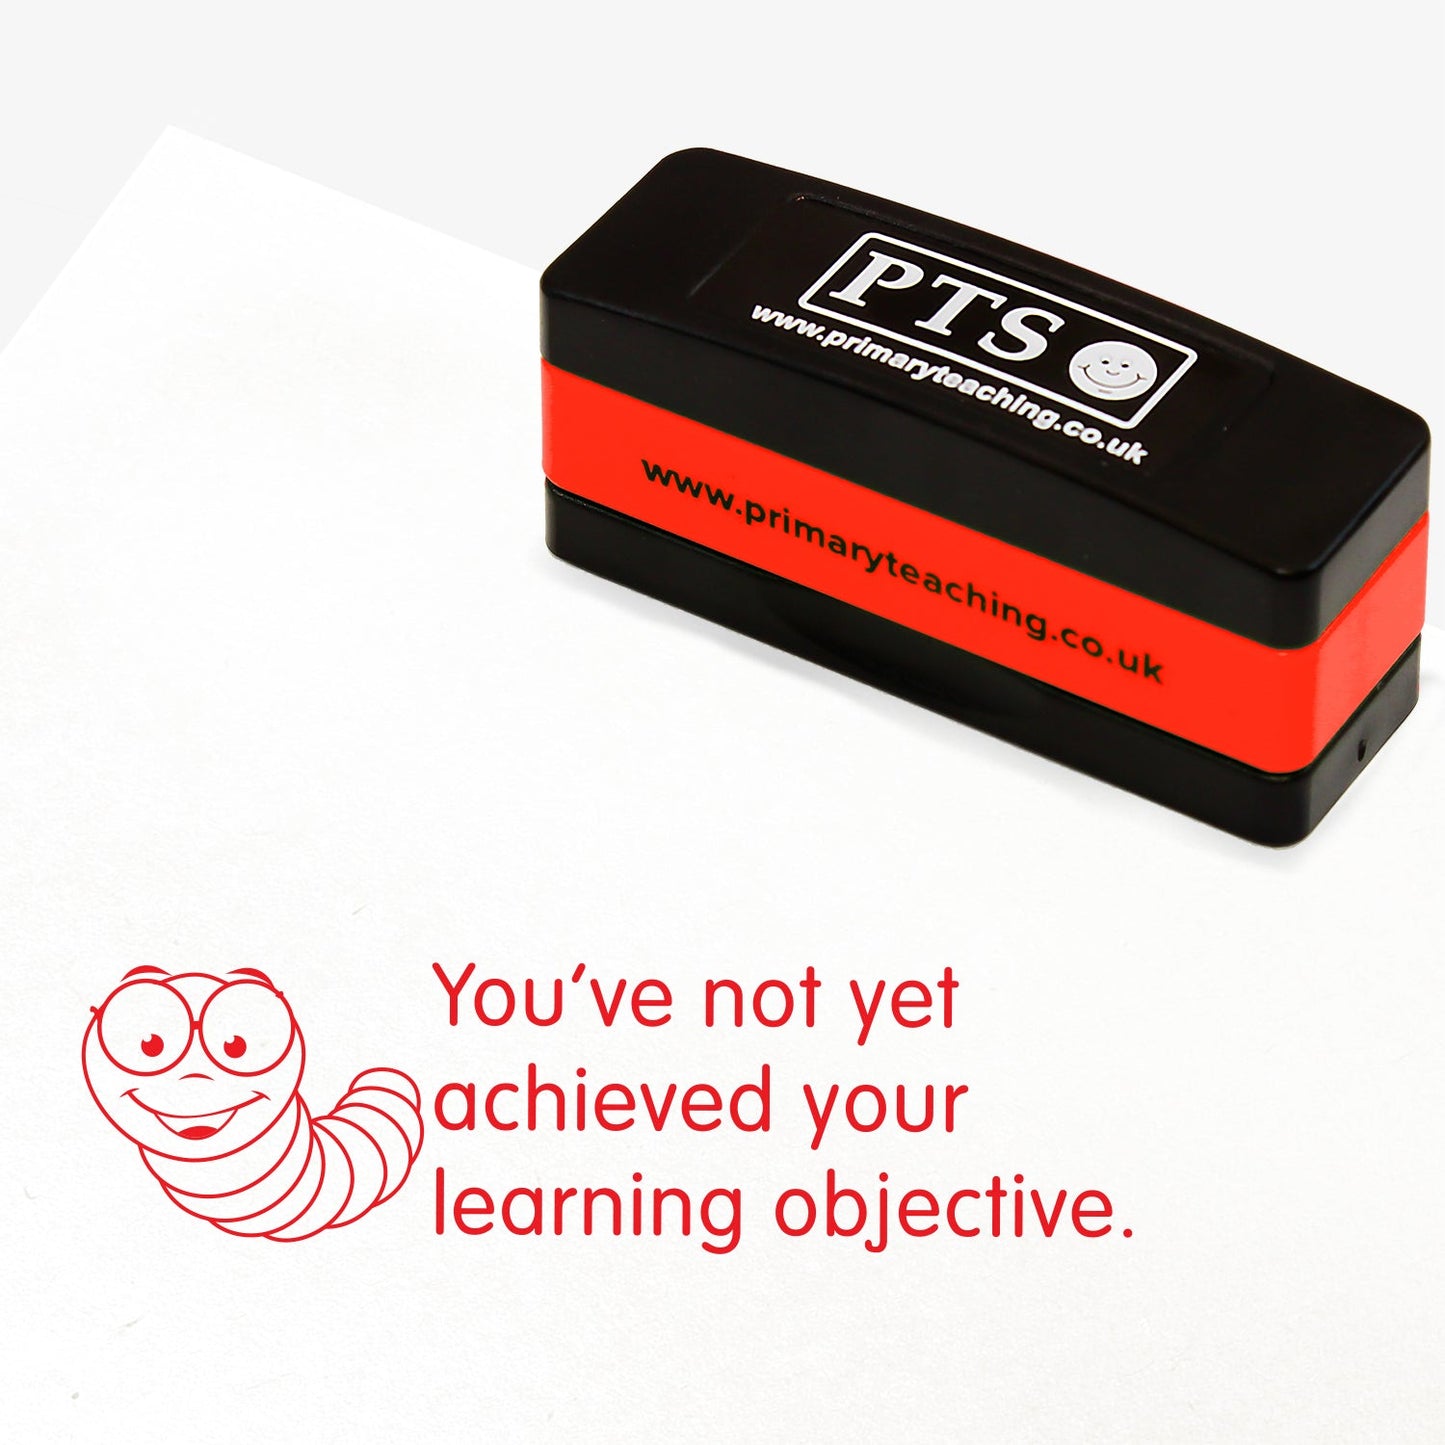 You've Not Yet Achieved Your Learning Objective Stakz Stamper - Red - 44 x 13mm